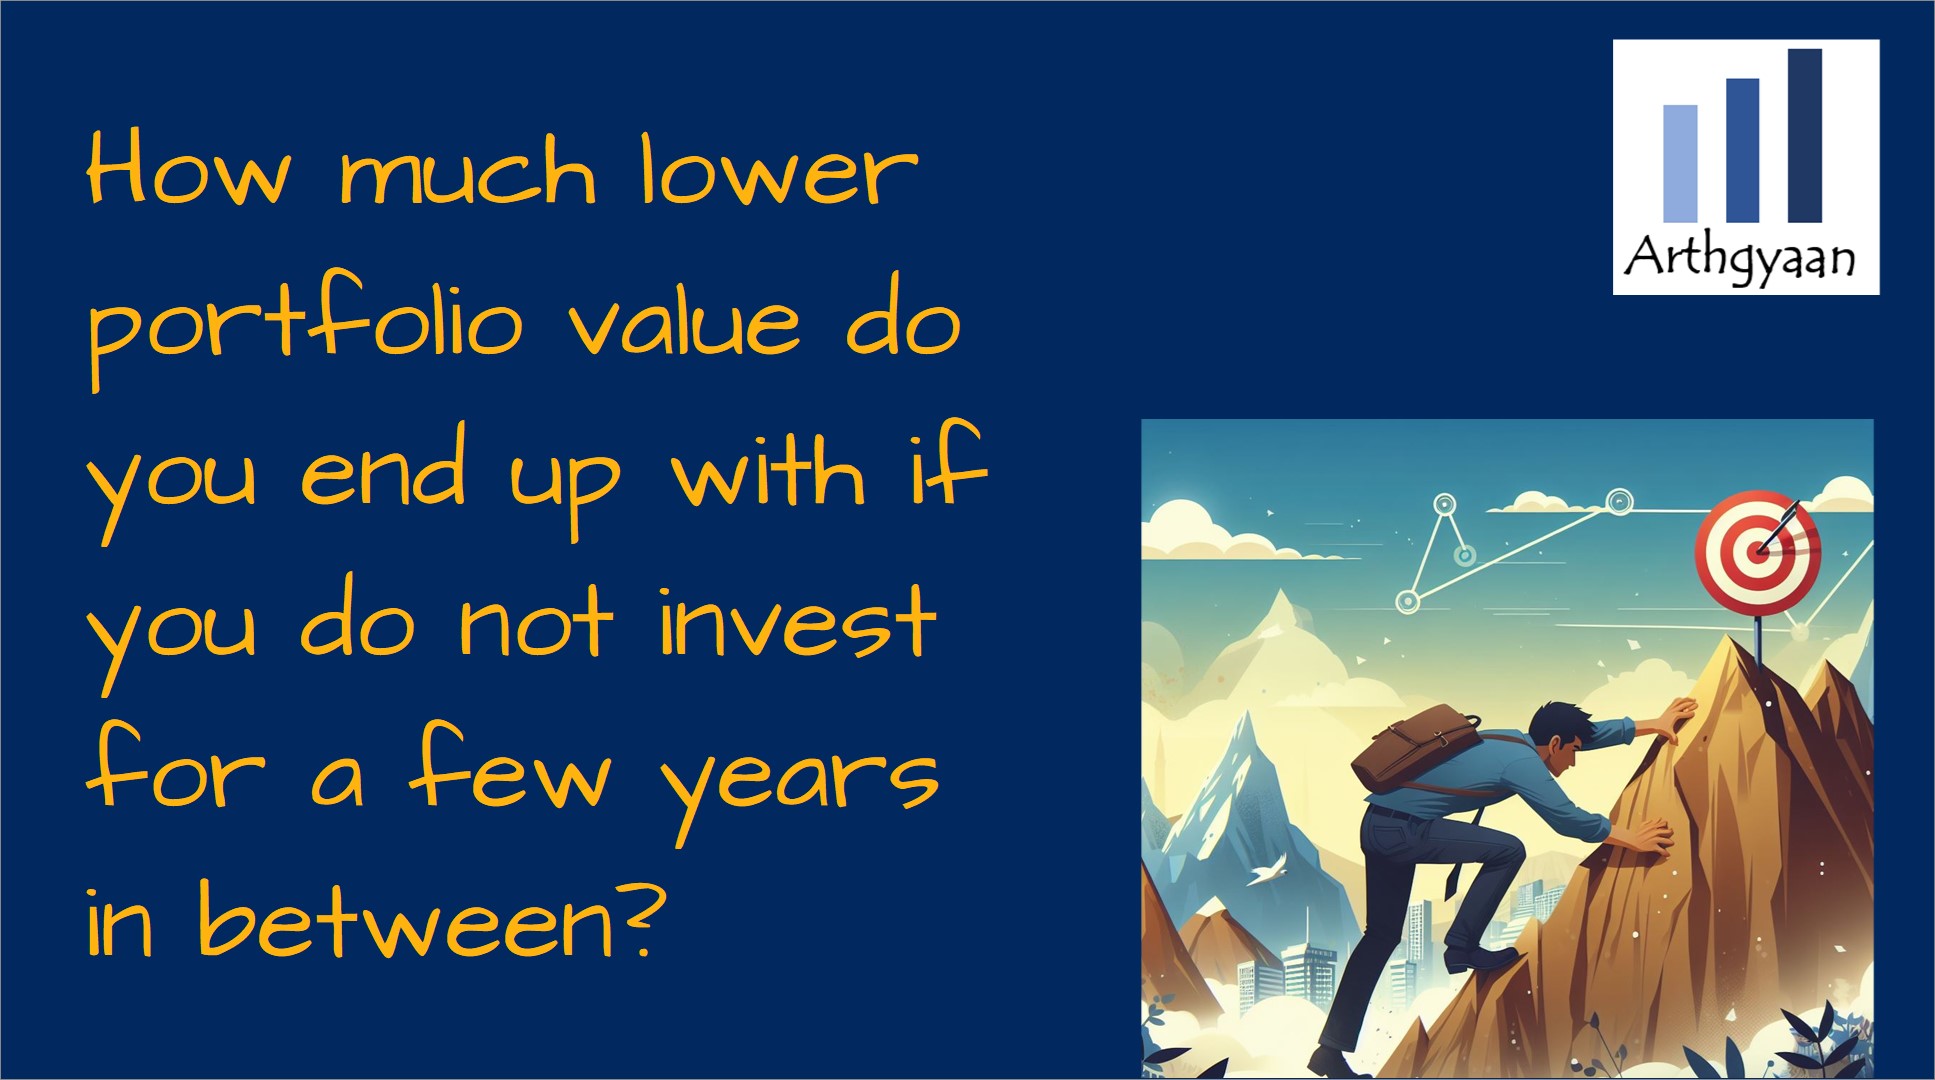 How much lower portfolio value do you end up with if you do not invest for a few years in between?